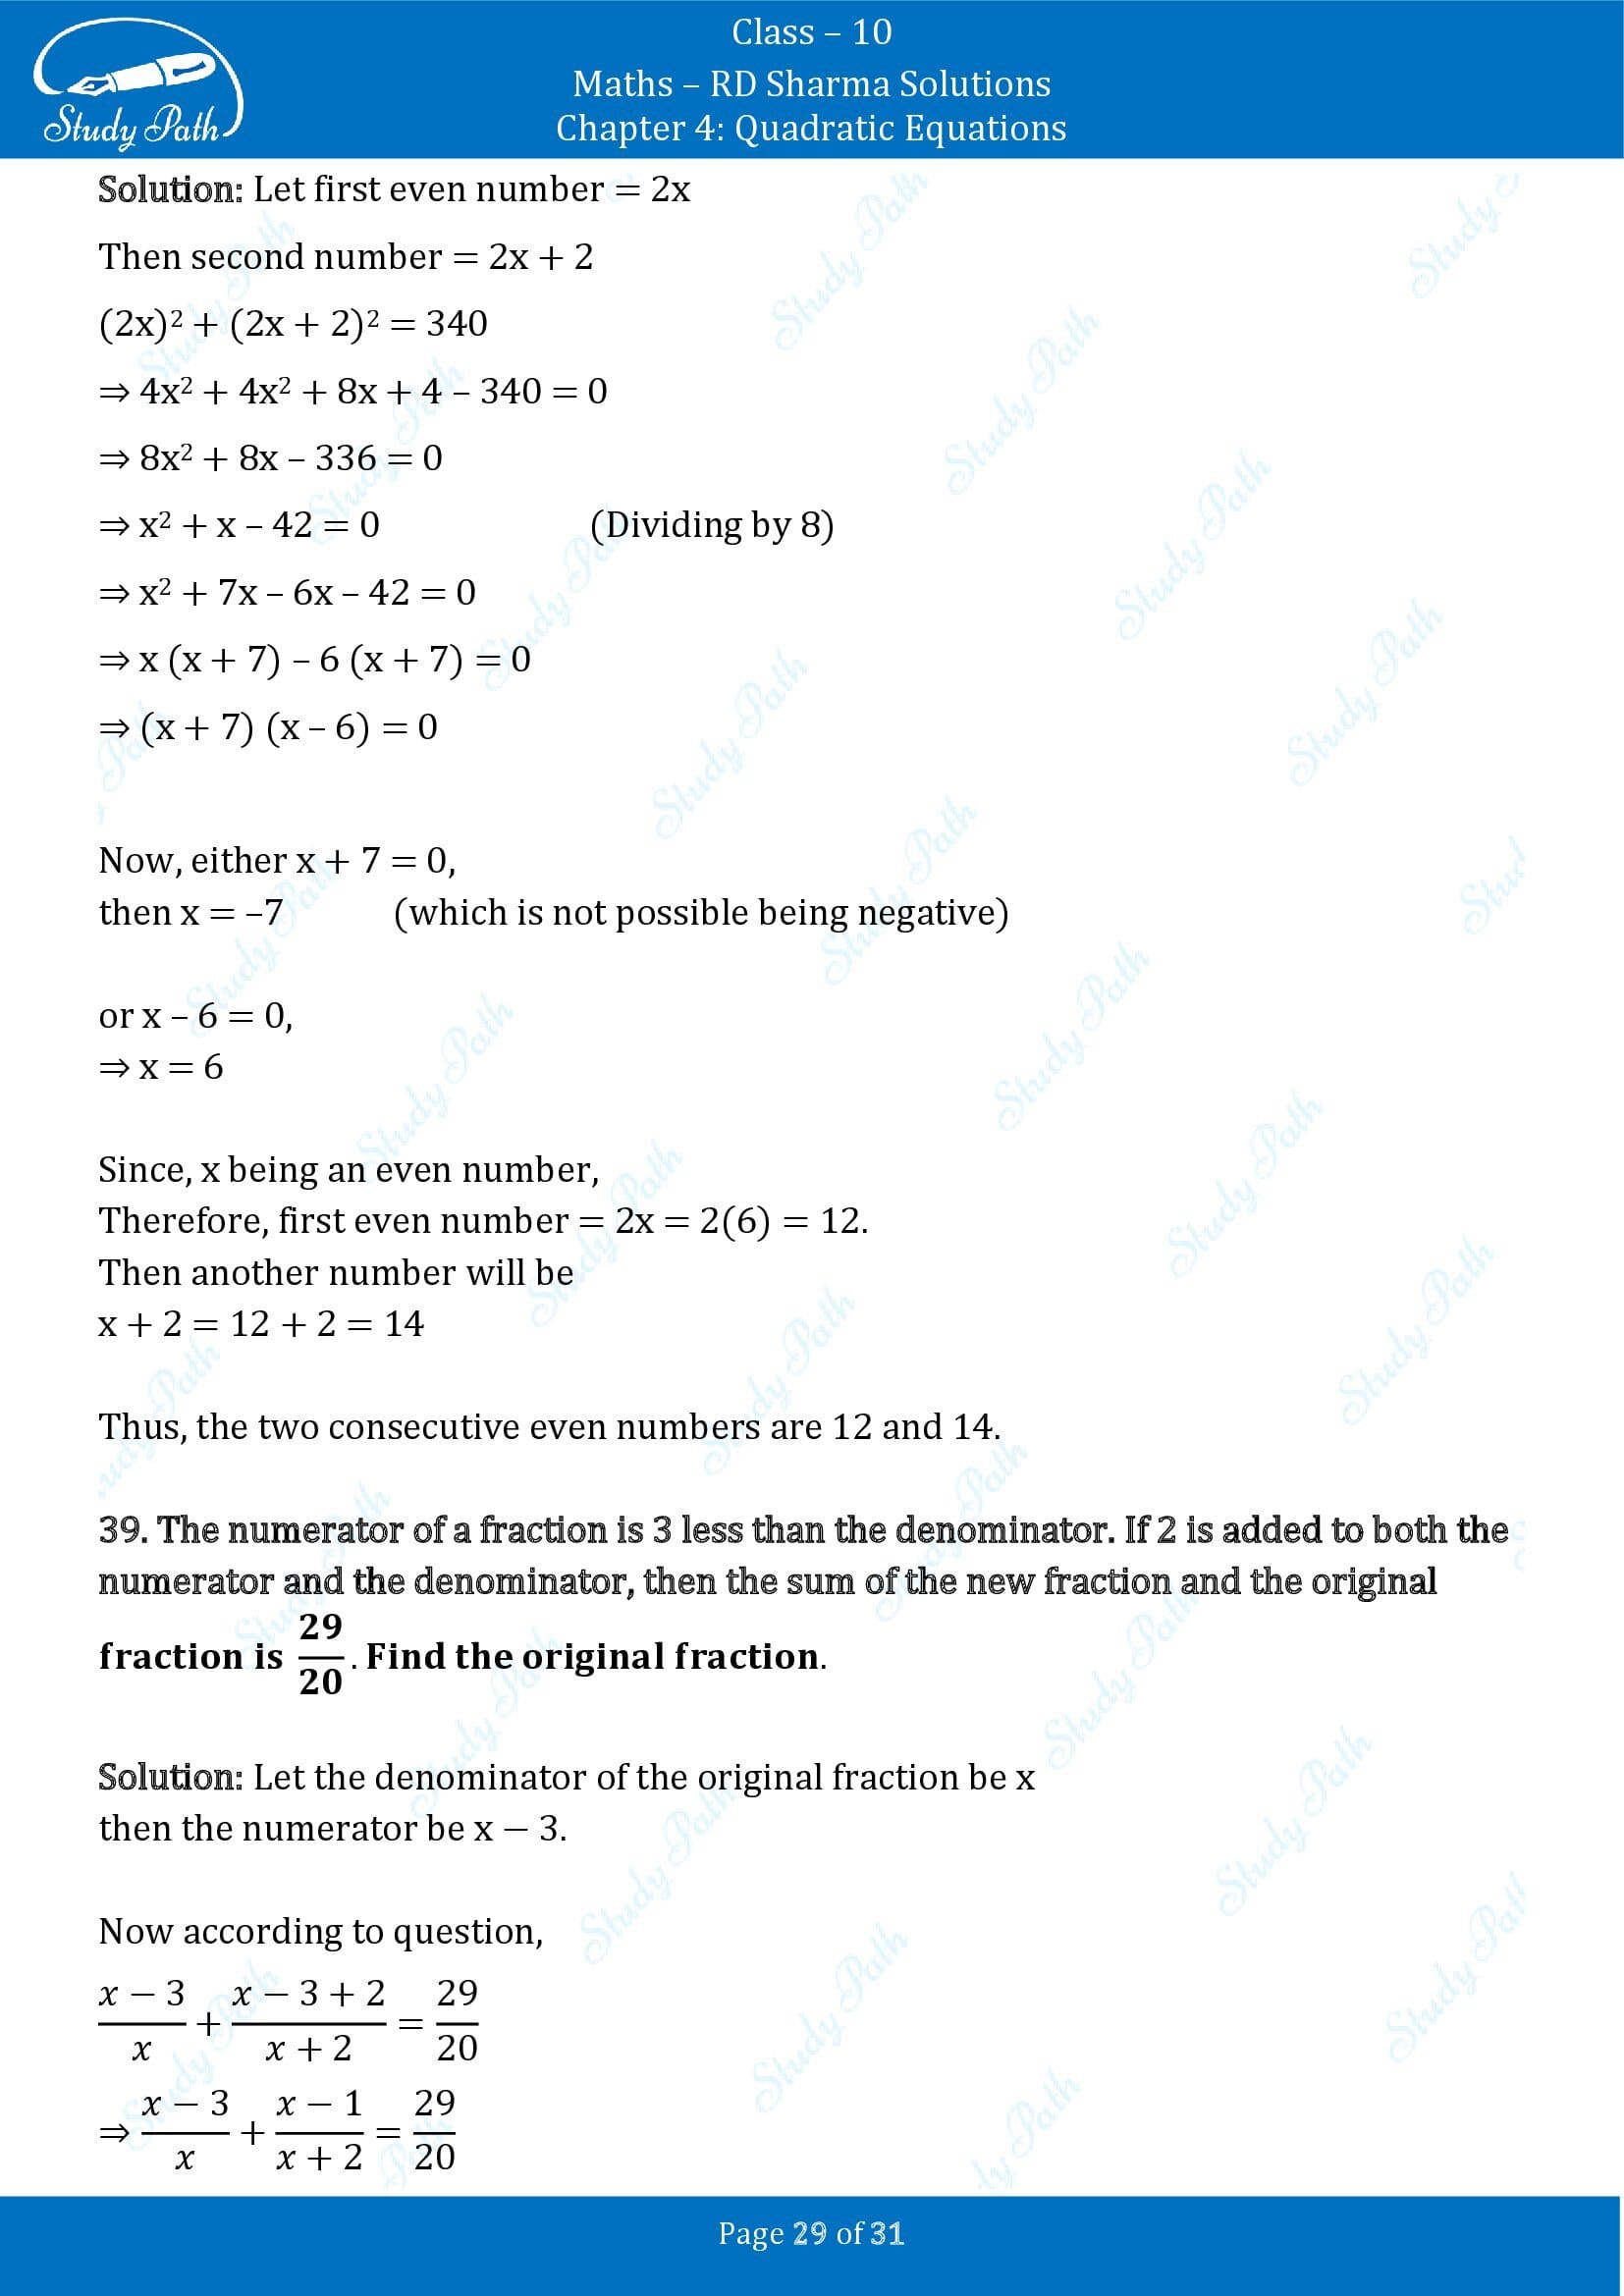 RD Sharma Solutions Class 10 Chapter 4 Quadratic Equations Exercise 4.7 00029